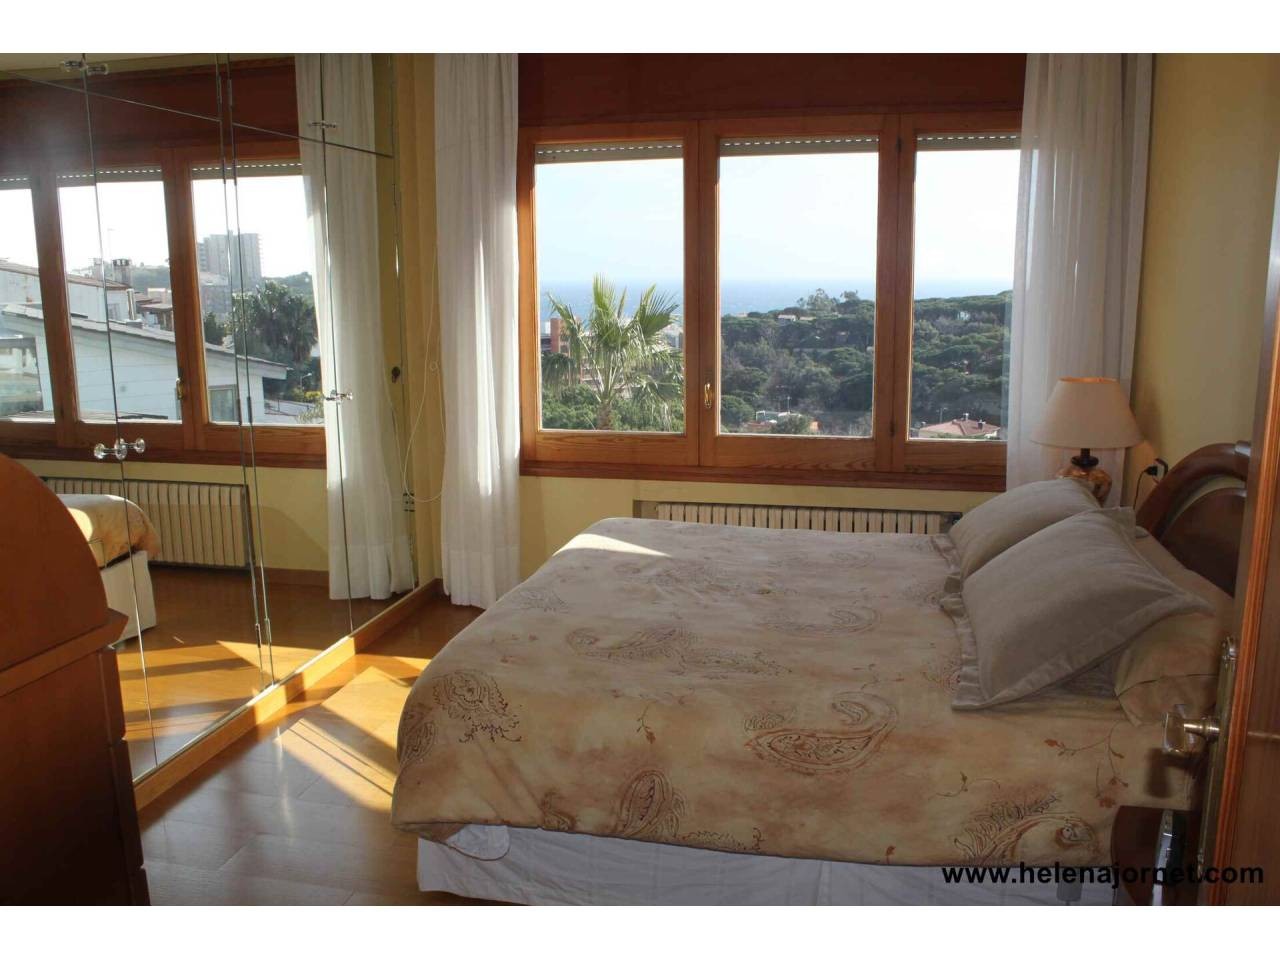 Sensational house with spectacular views to Sant Pol's bay - 337